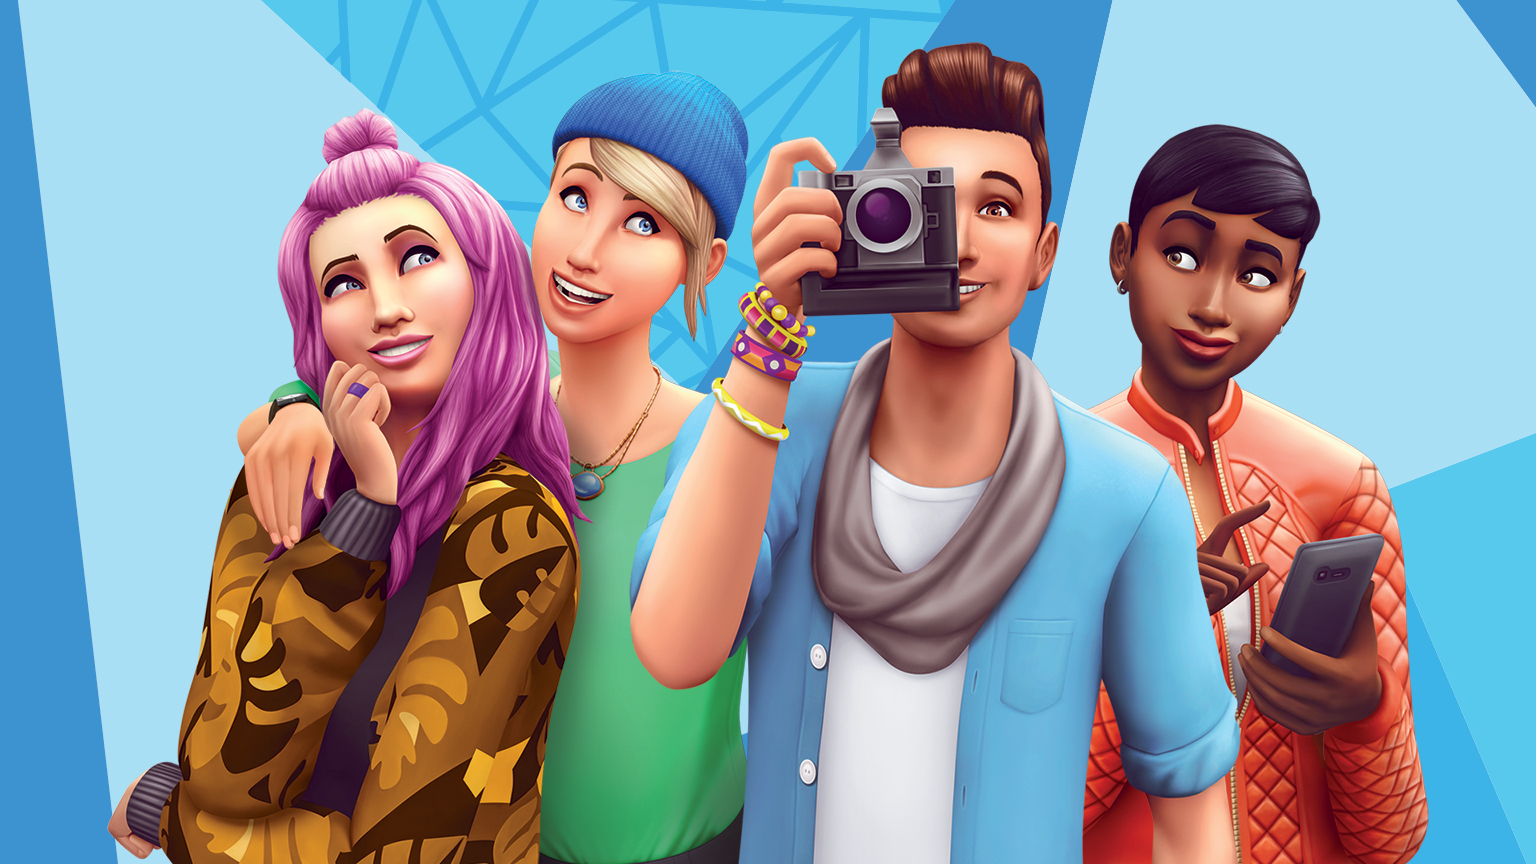 Is The Sims 4 on Nintendo Switch?